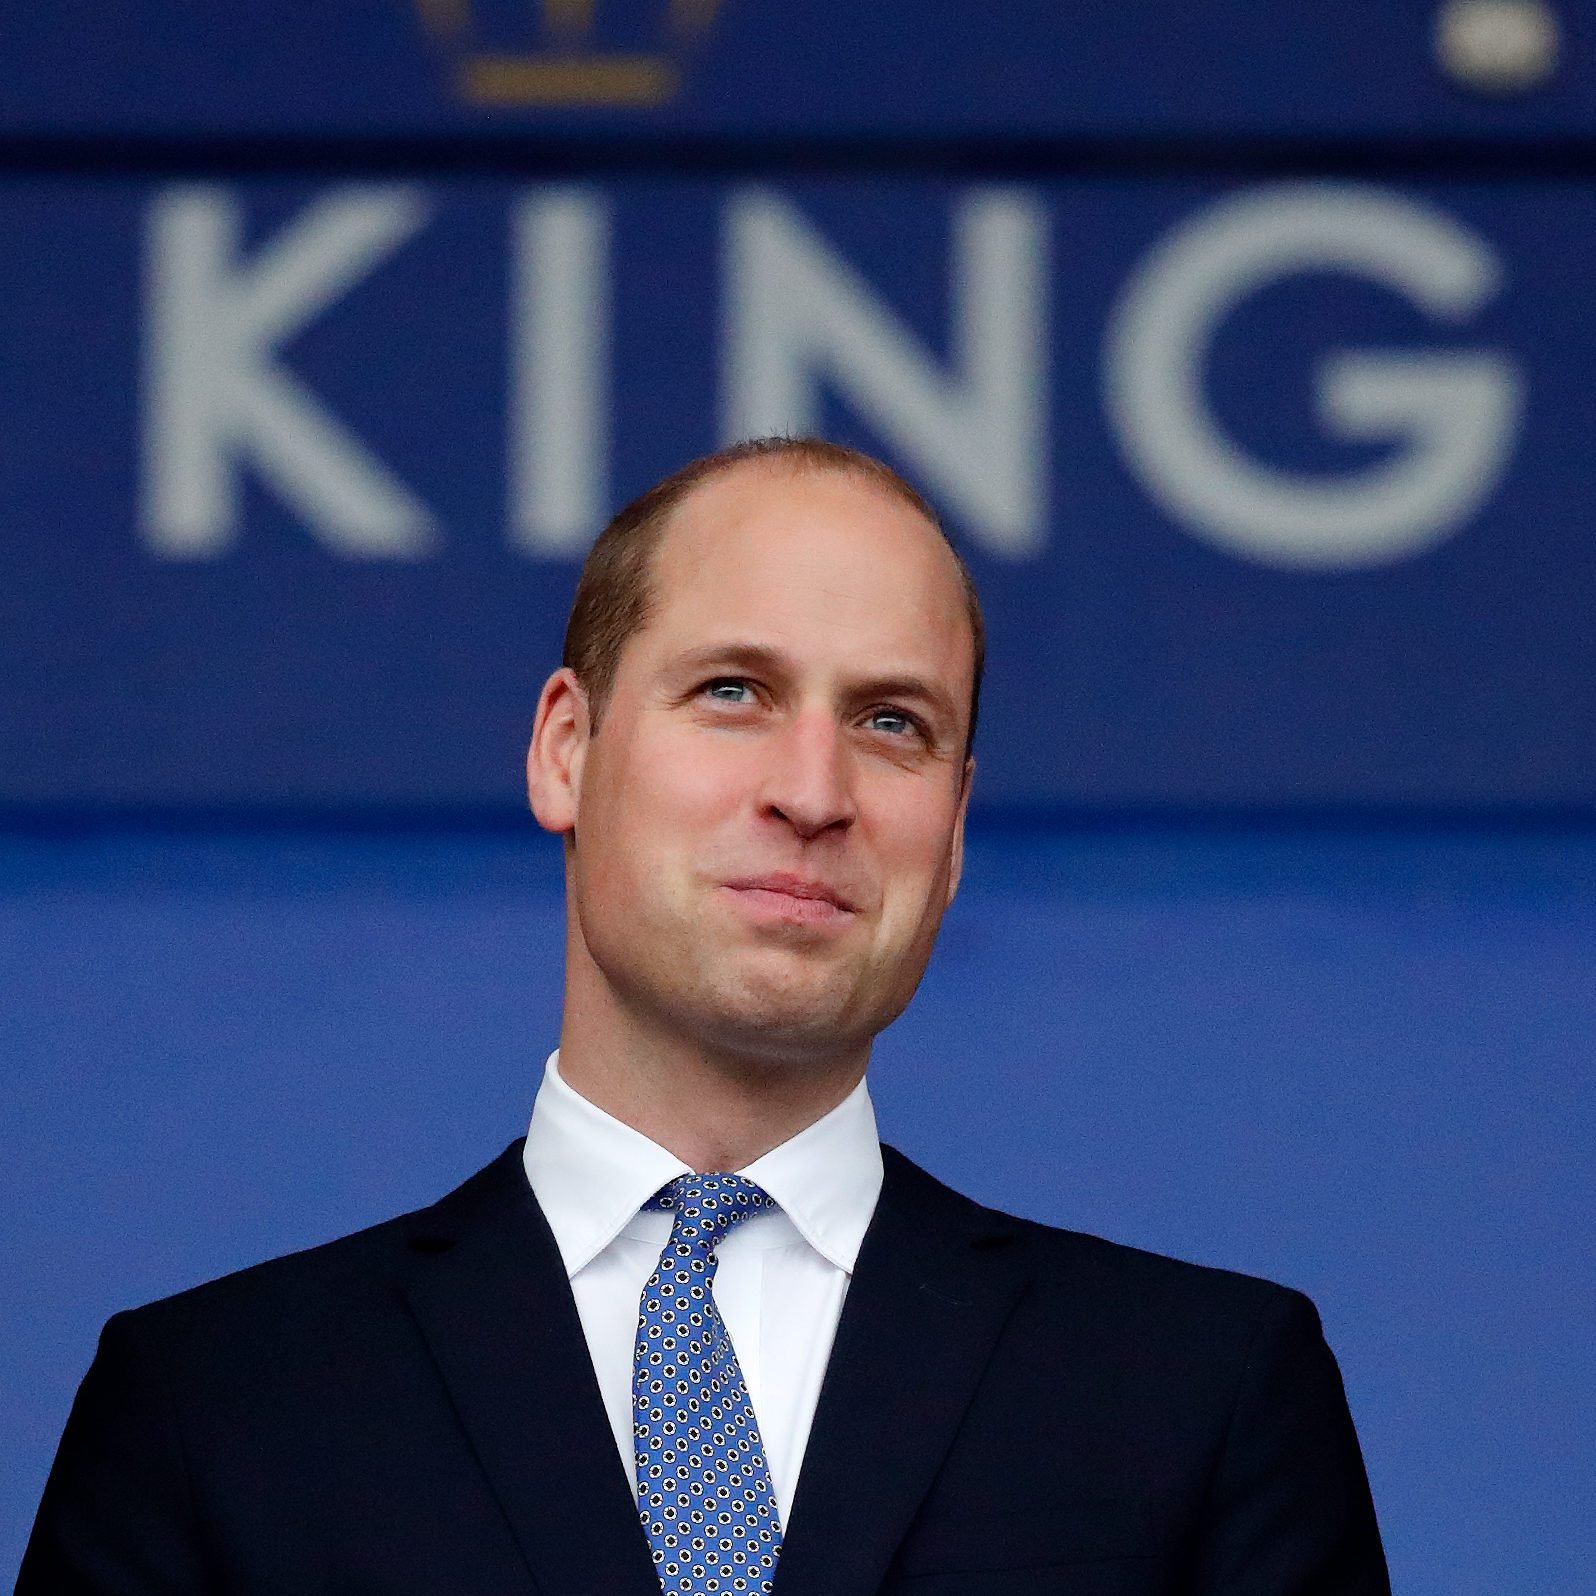 Photos of Prince William Acting Like a Future King | Reader's Digest